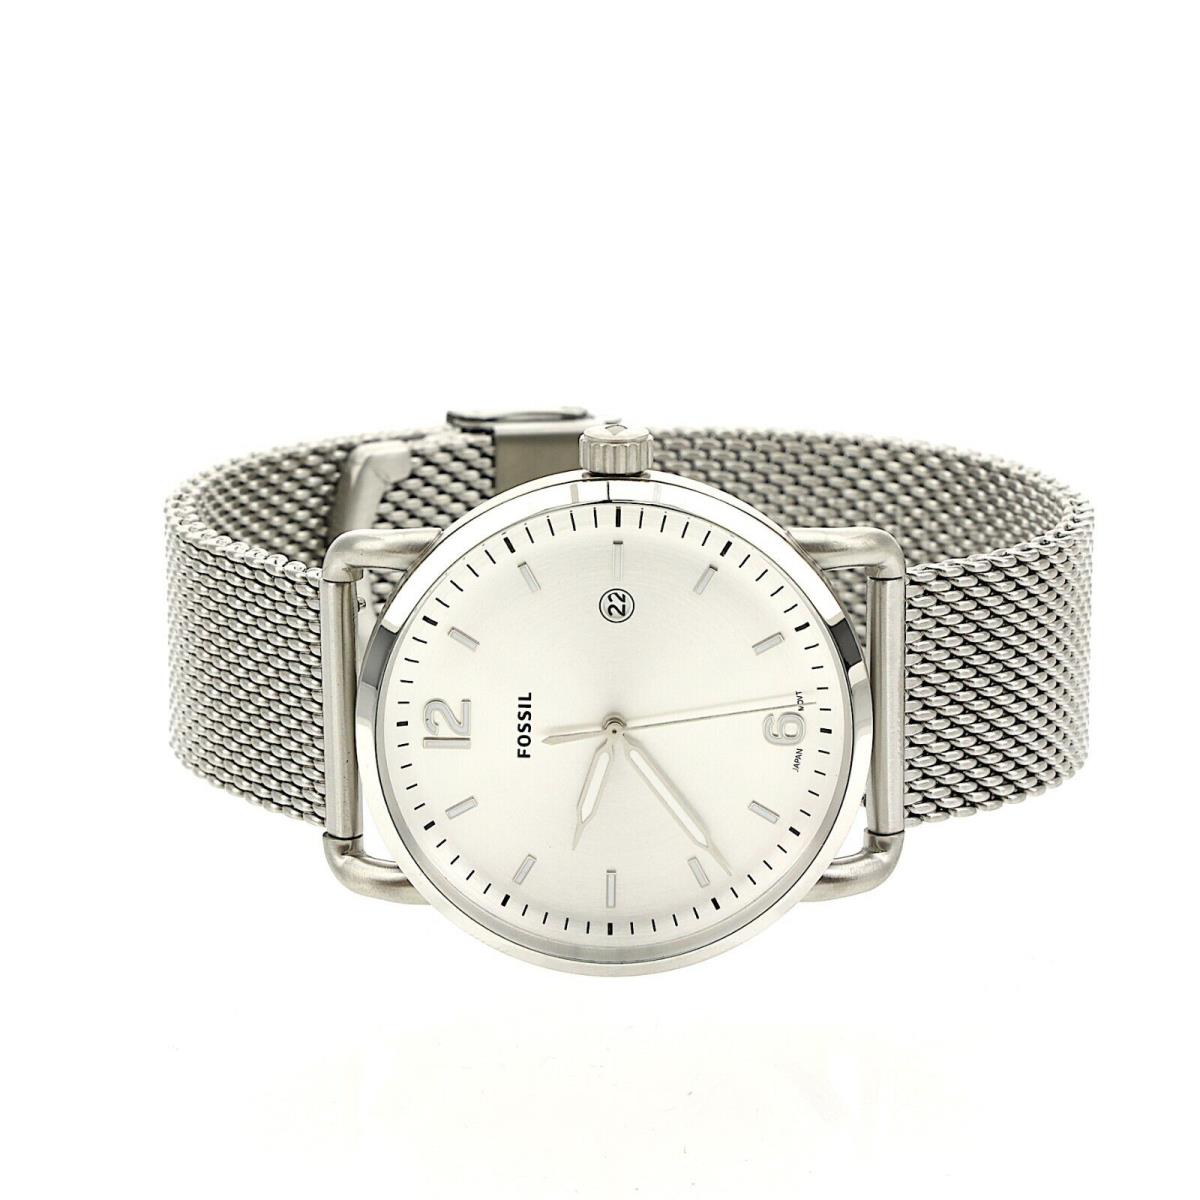 Fossil Men`s The Commuter Silver Mesh Strap Watch 1025 - Silver Dial, Silver Band